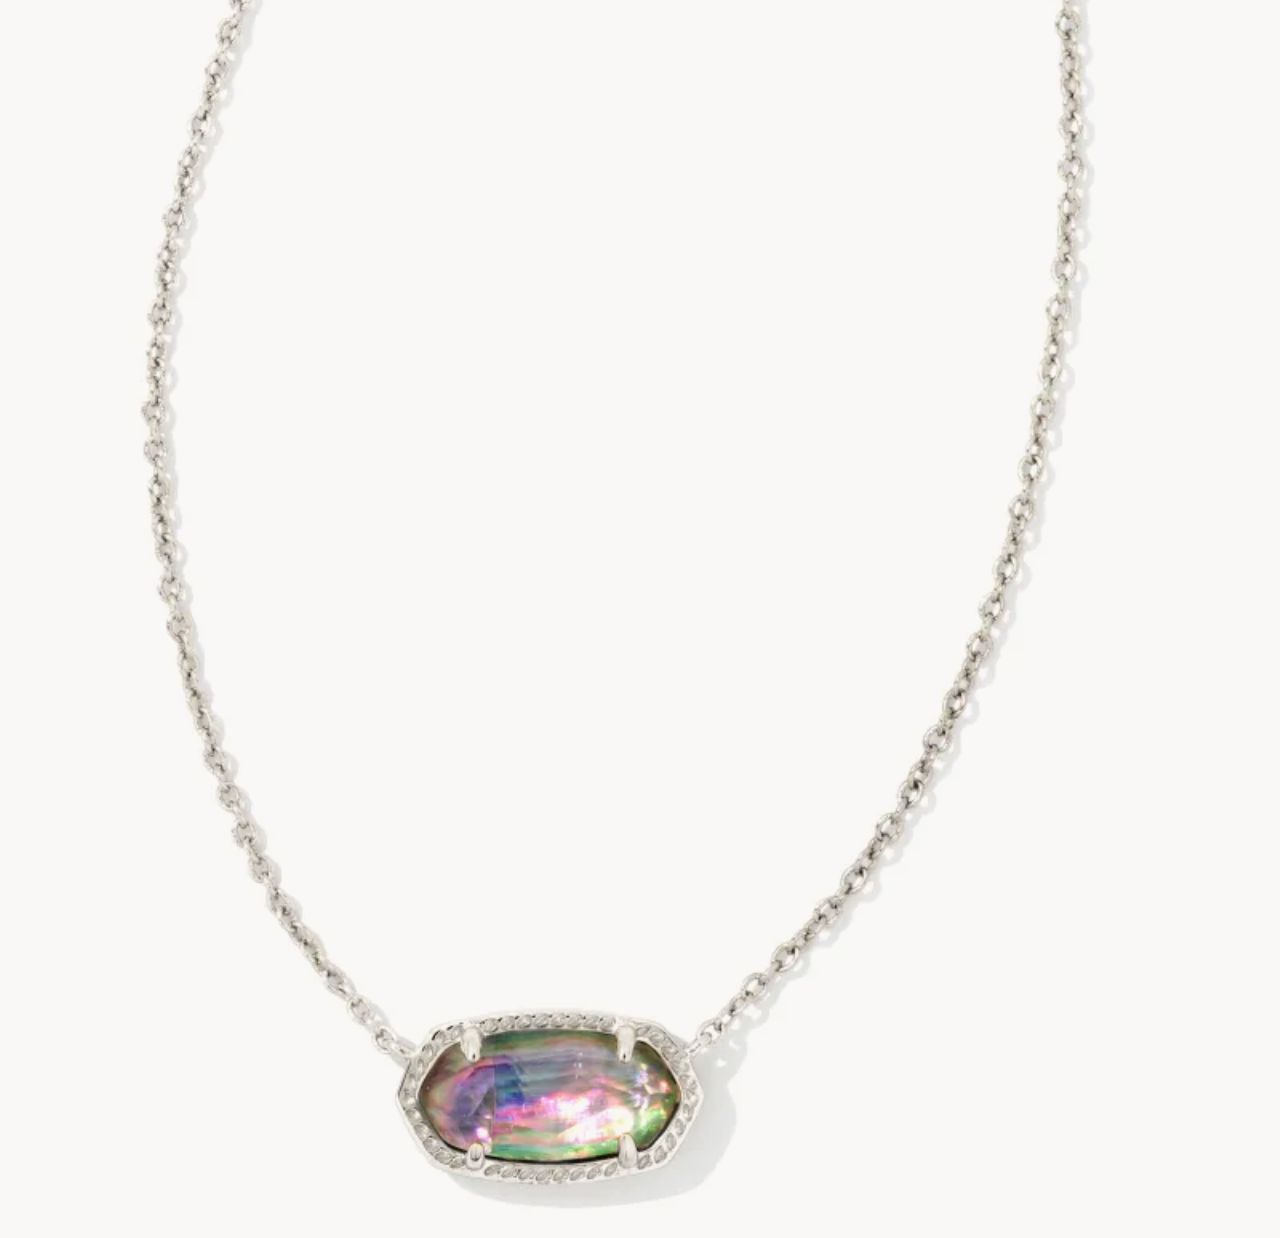 Kendra Scott Elisa Silver Necklace in Lilac Abalone